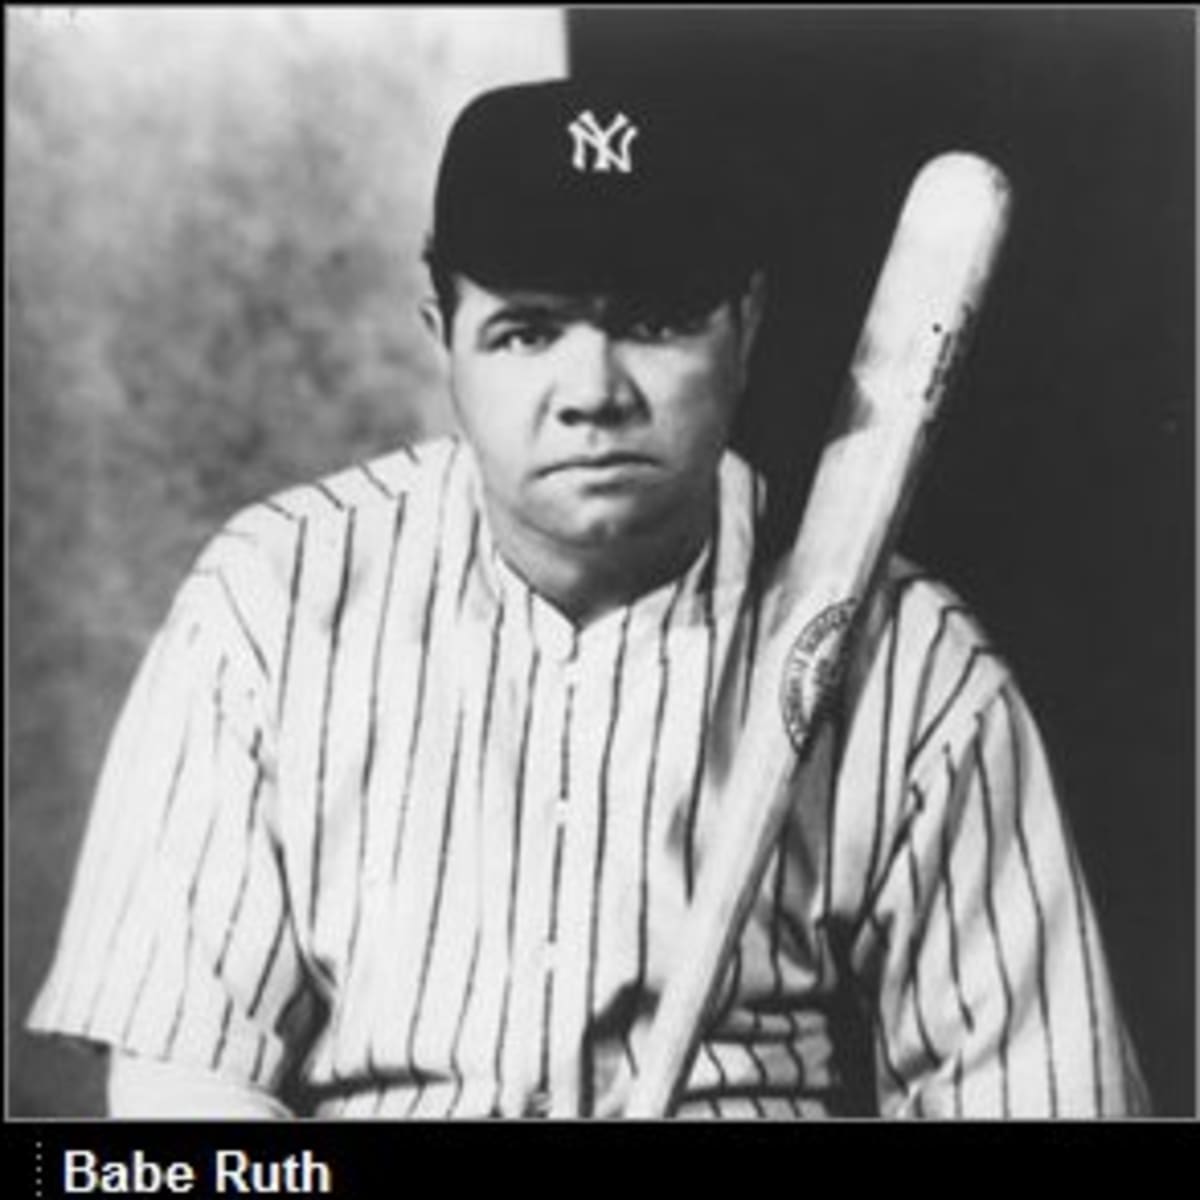 Baseball In Pics - Babe Ruth announced his retirement at the age